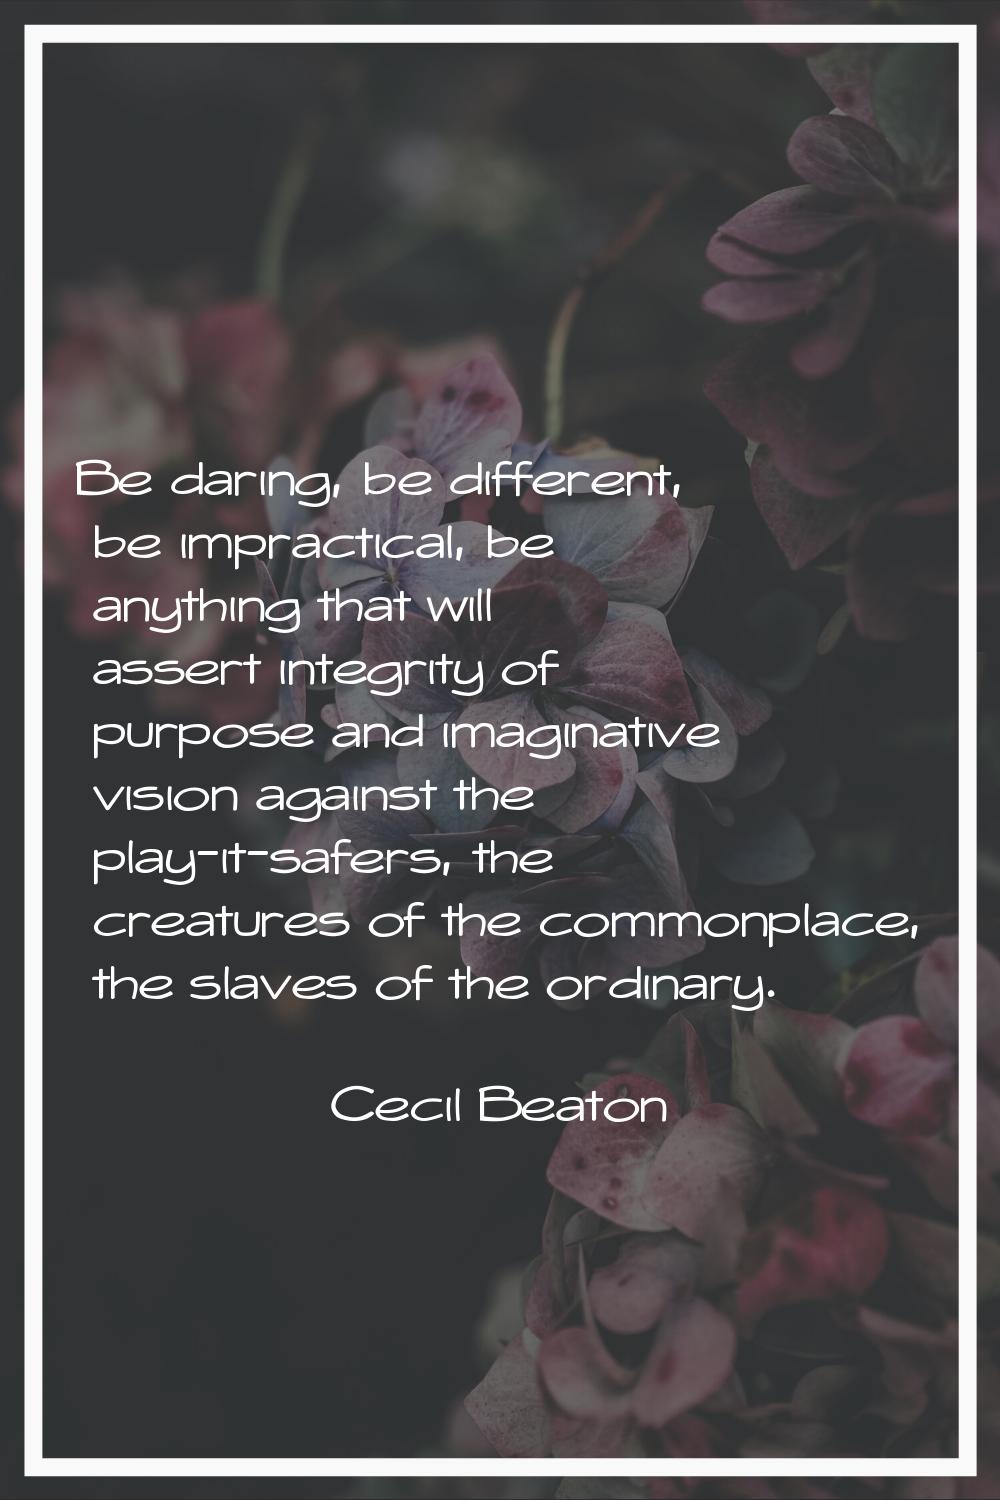 Be daring, be different, be impractical, be anything that will assert integrity of purpose and imag